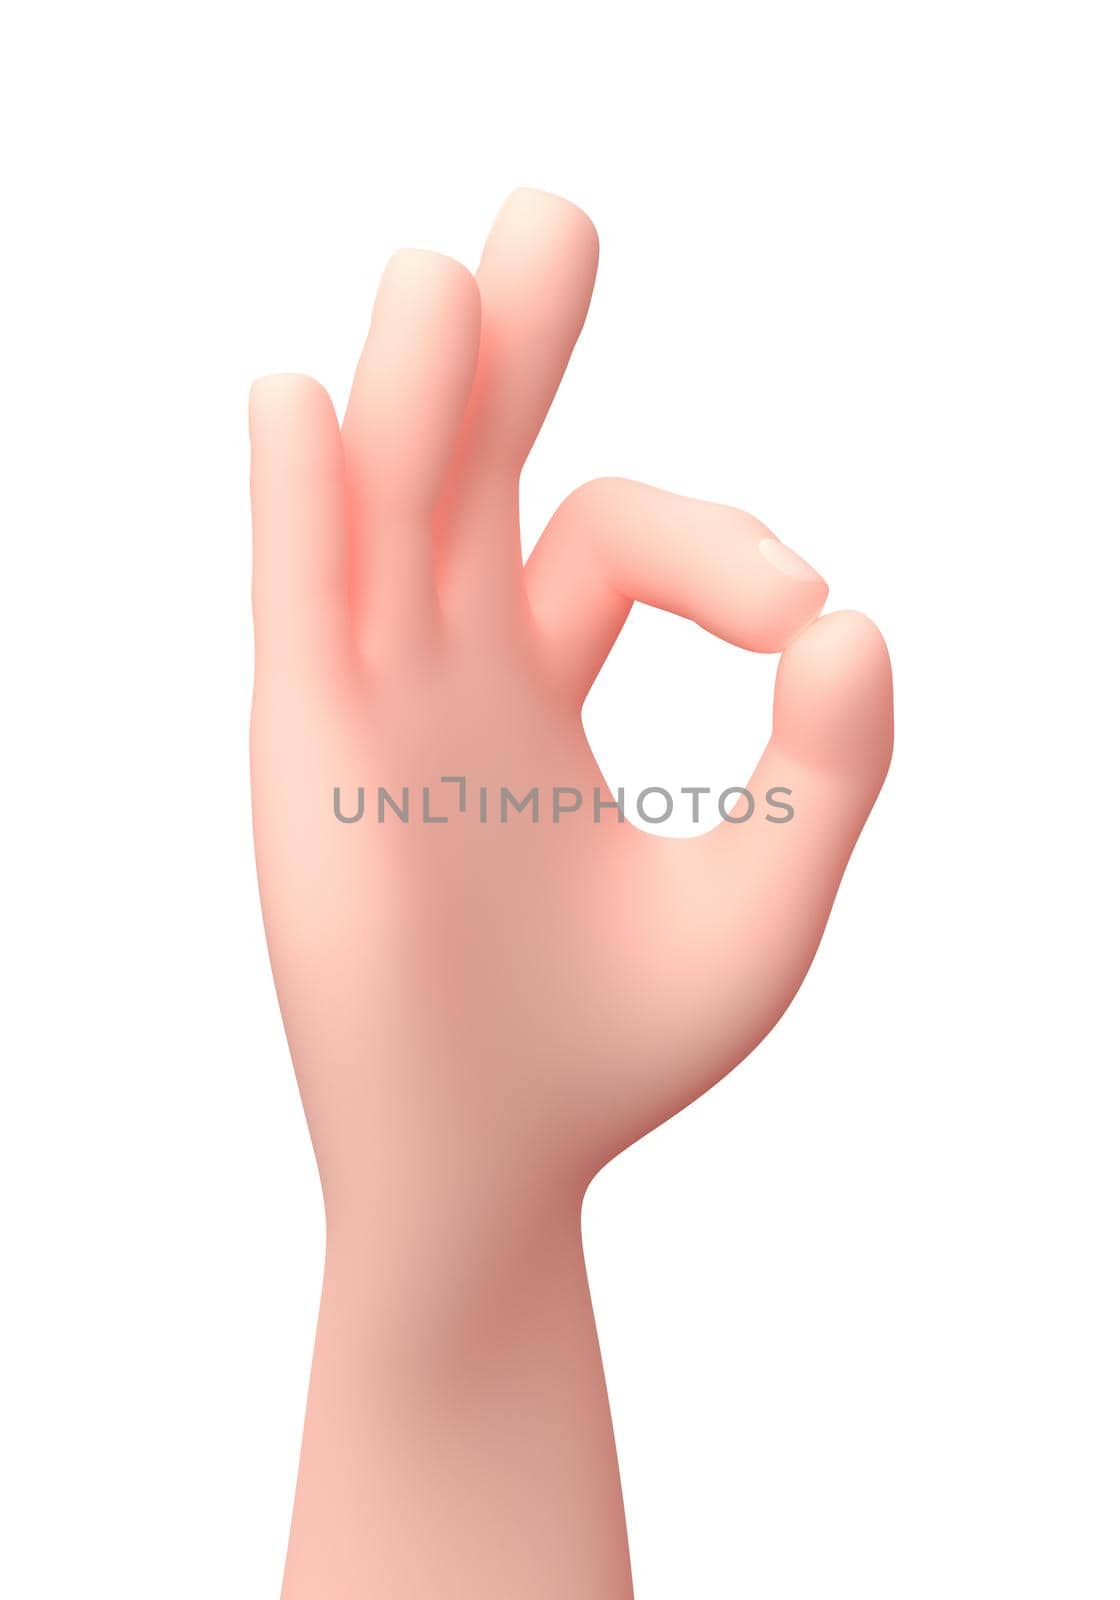 OK Sign Hand. 3D Cartoon Character. Isolated on White Background 3D Illustration